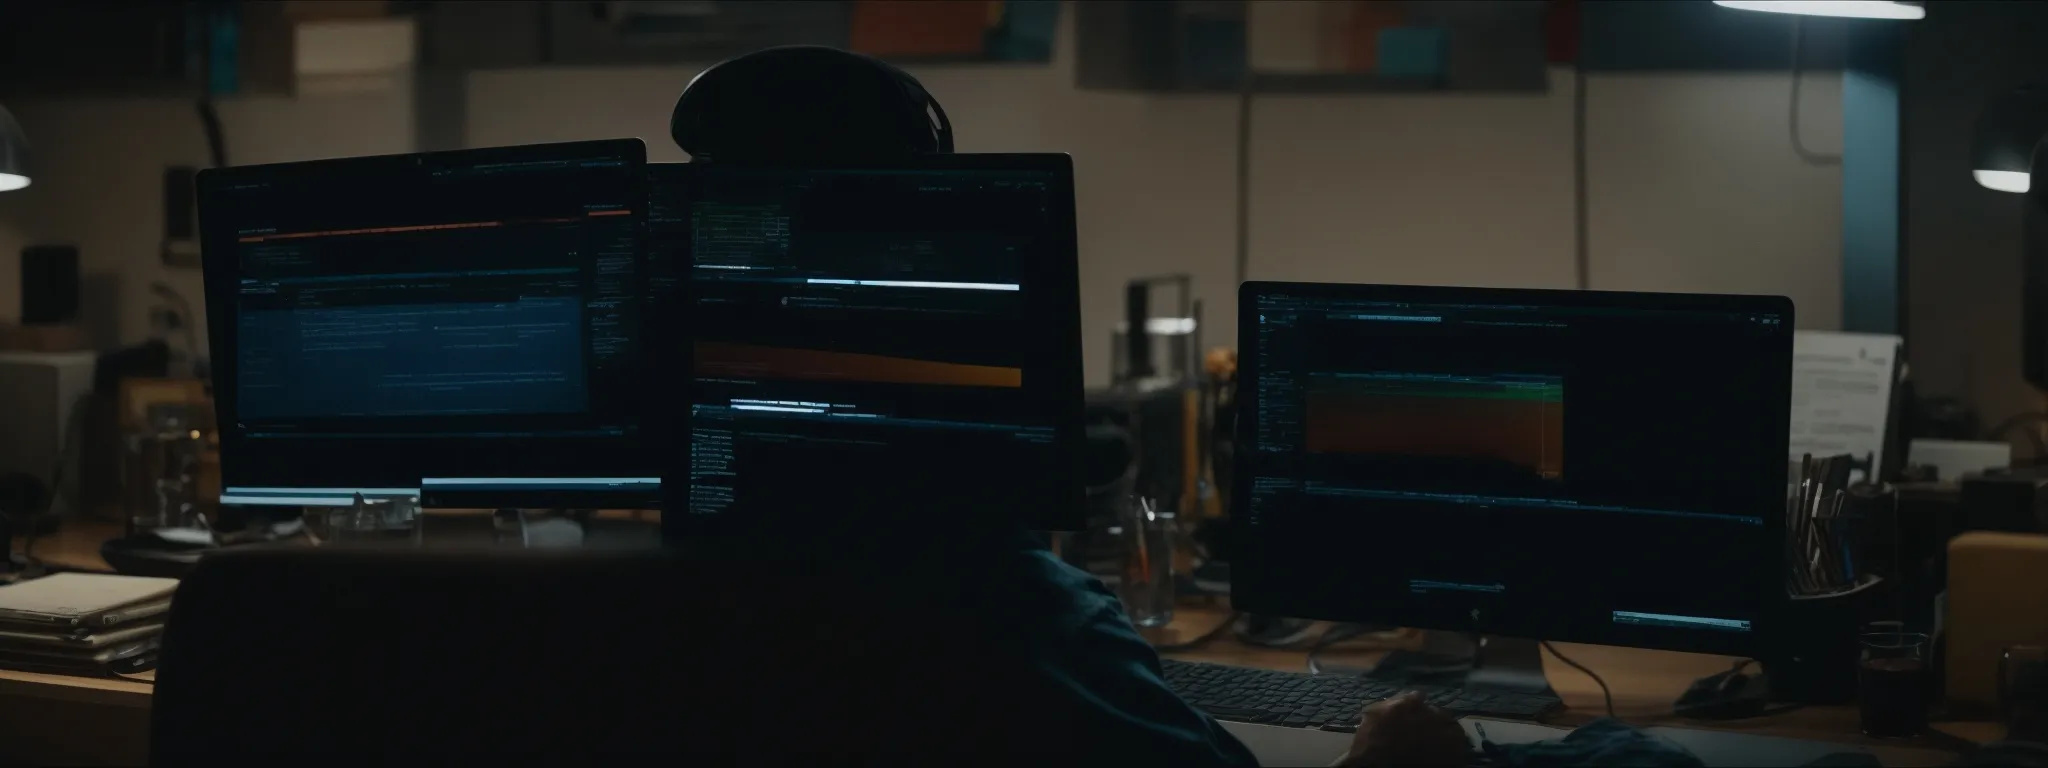 a person sitting at a computer with multiple browser tabs open, indicating research activity.